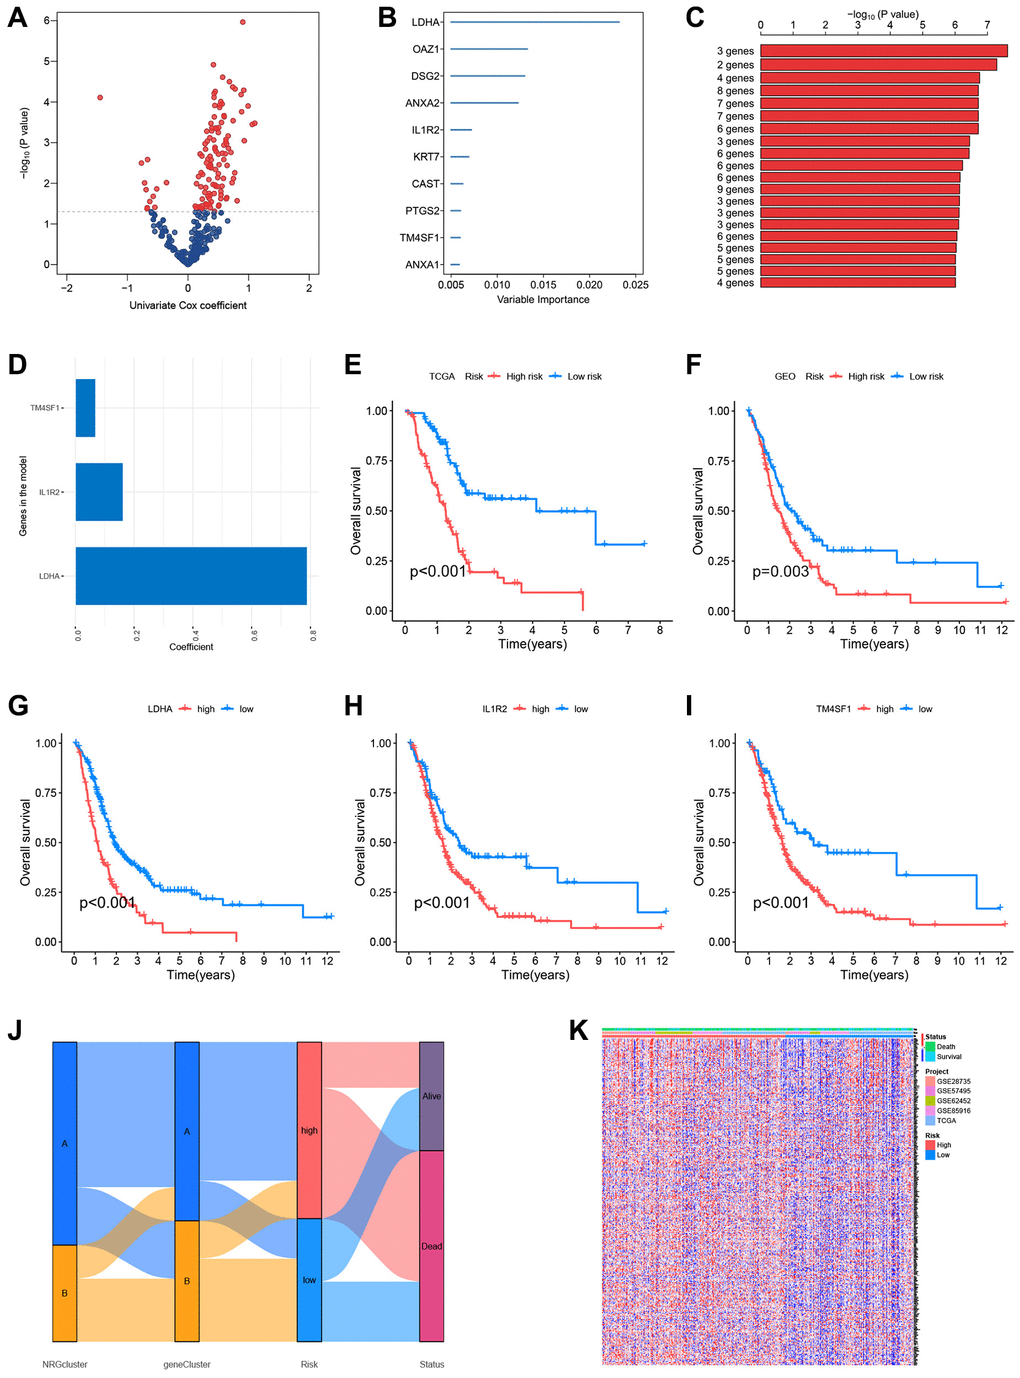 Construction of the prognostic risk score model. (A) Volcano plot of univariate Cox regression analysis results. Red dots represent neutrophil-related genes associated with pancreatic cancer prognosis. (B) Random survival forest analysis identified the top 10 important genes. (C) After survival analysis of 210−1 = 1023 combinations, the top 20 models were sorted according to P-values. The best model comprised three genes. (D) Coefficients of genes in the model. (E) The Cancer Genome Atlas (TCGA) dataset (Kaplan-Meir curve of the training set). (F) GSE28735, GSE62452, GSE57495, and GSE85916 datasets from the Gene Expression Omnibus (GEO) platform (Kaplan-Meir curves of the validation set). Survival curves of patients according to the expression of LDHA (G), IL1R2 (H), and TM4SF1 (I). (J) Sankey plots of different subtypes, risk groups, and survival states. (K) The expression of neutrophil-associated genes in high-risk and low-risk groups, most neutrophil-associated genes are upregulated in the high-risk groups.